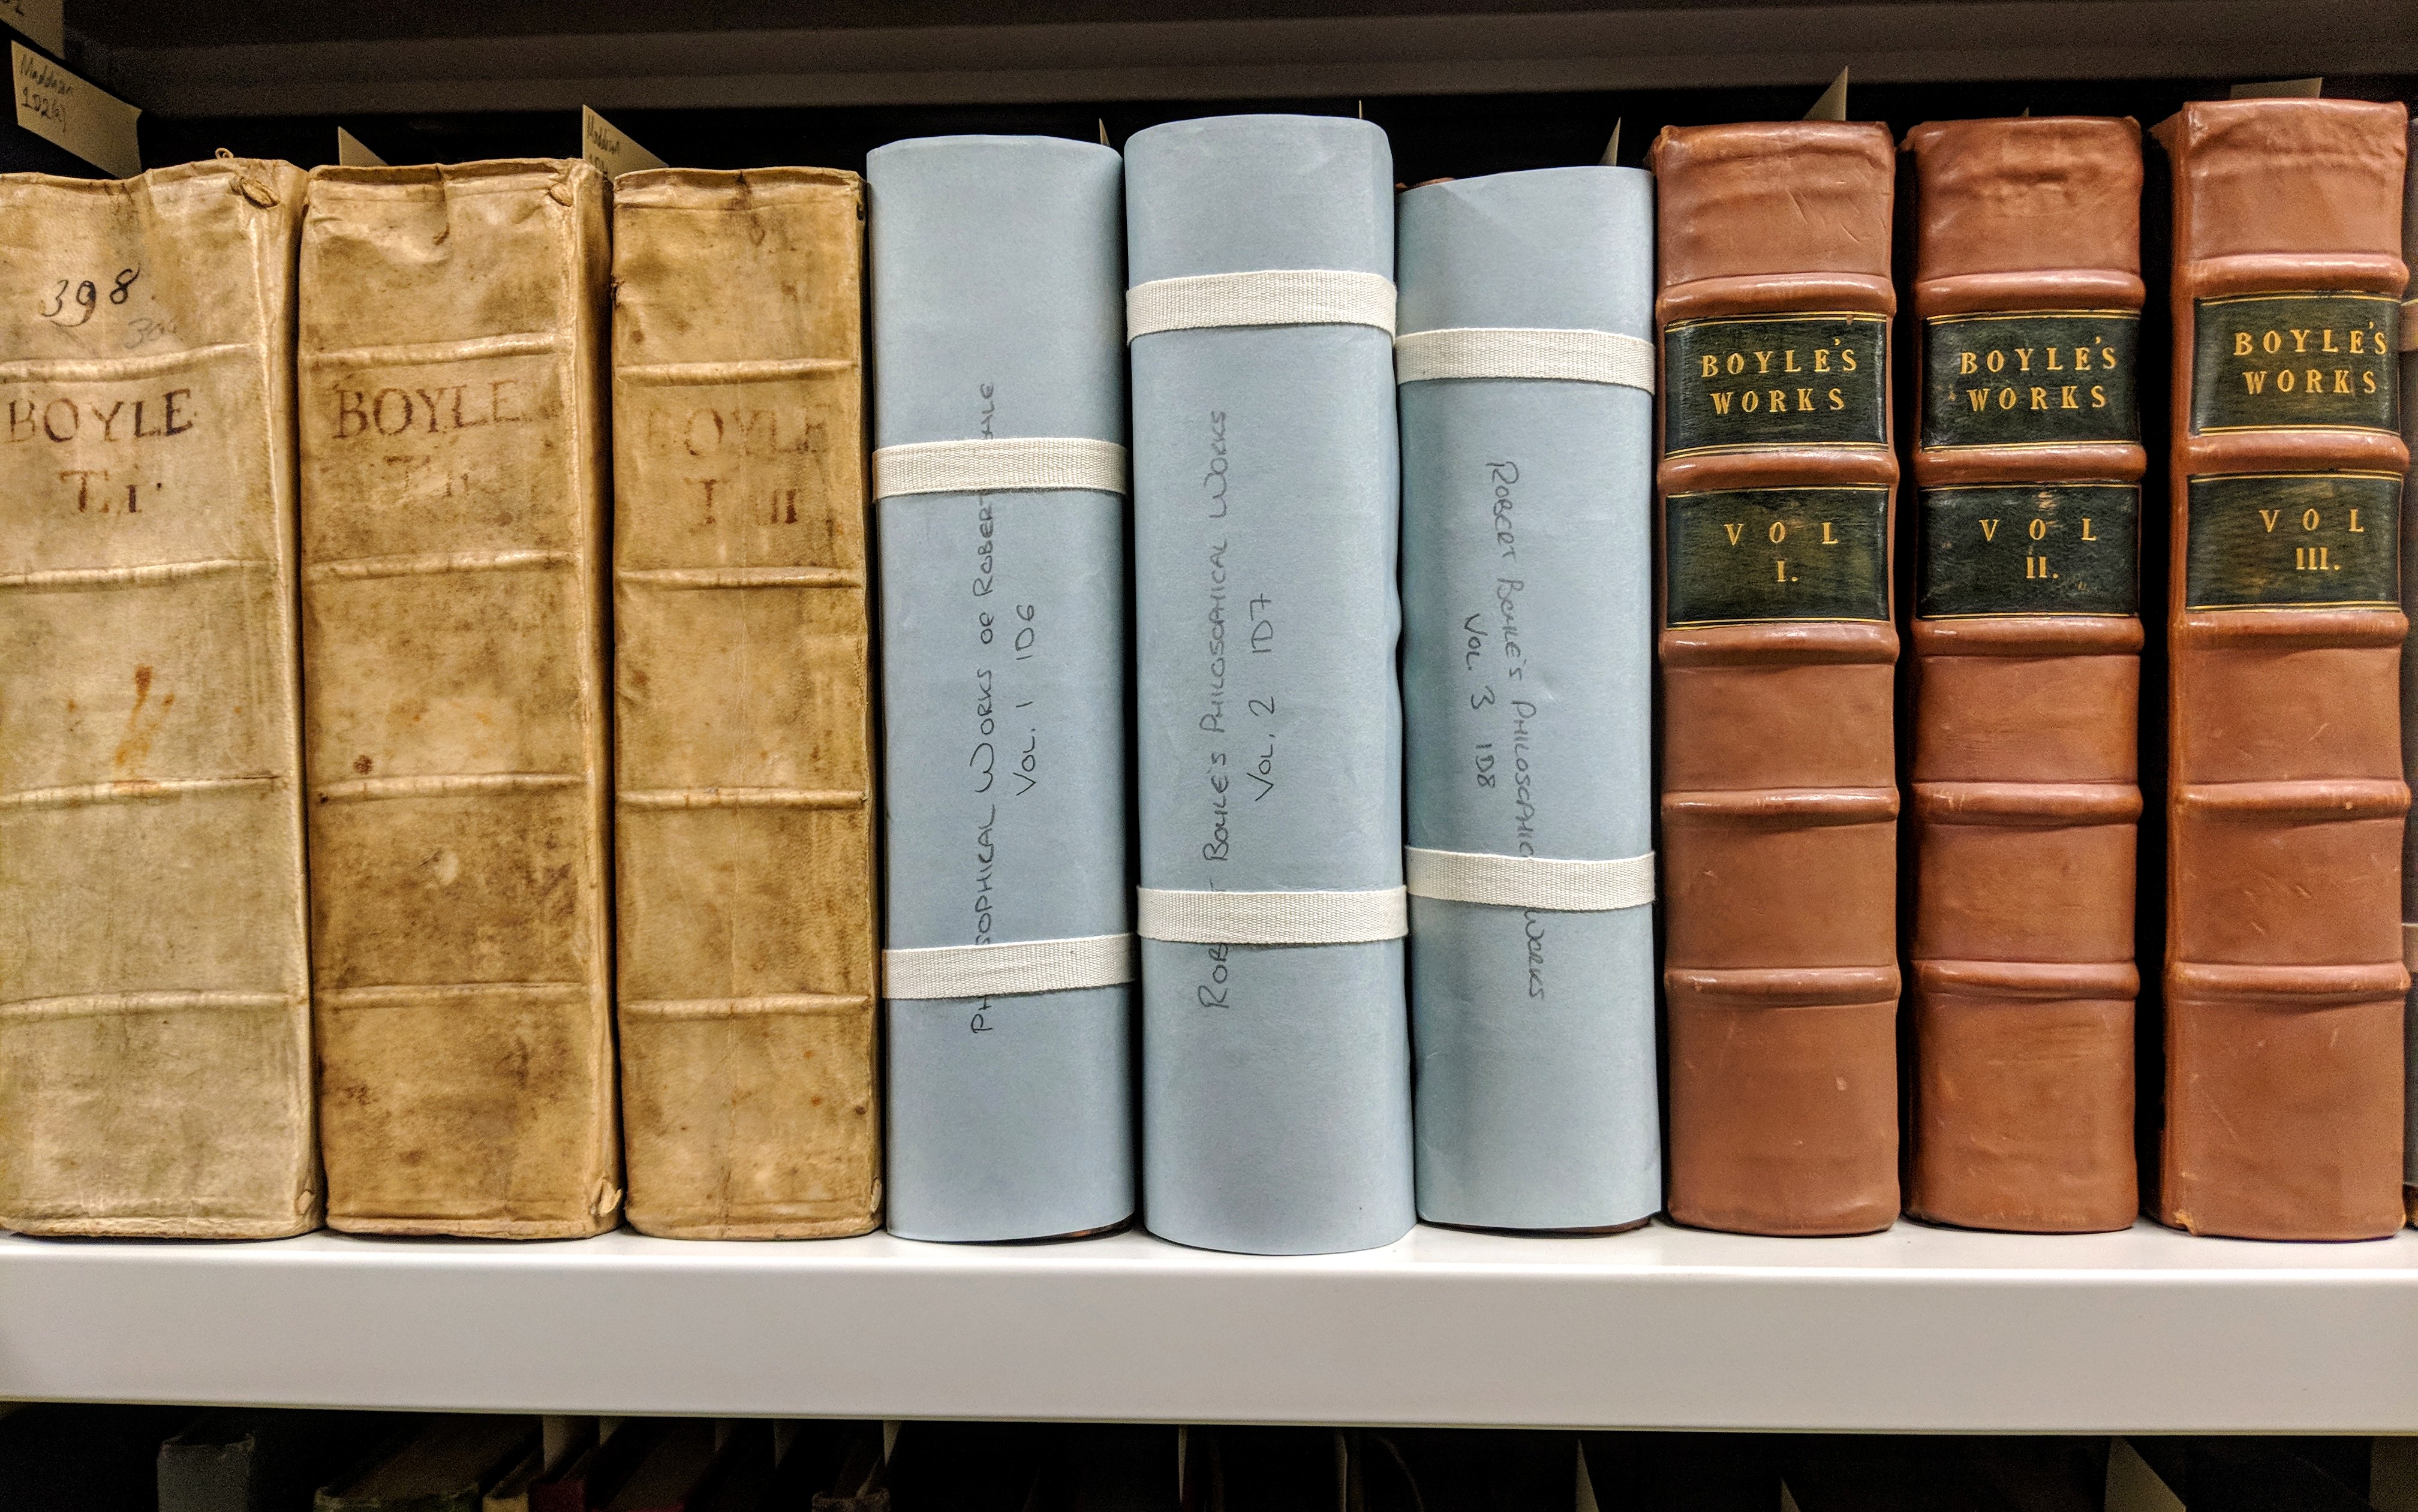 Row of books in the Maddison collection